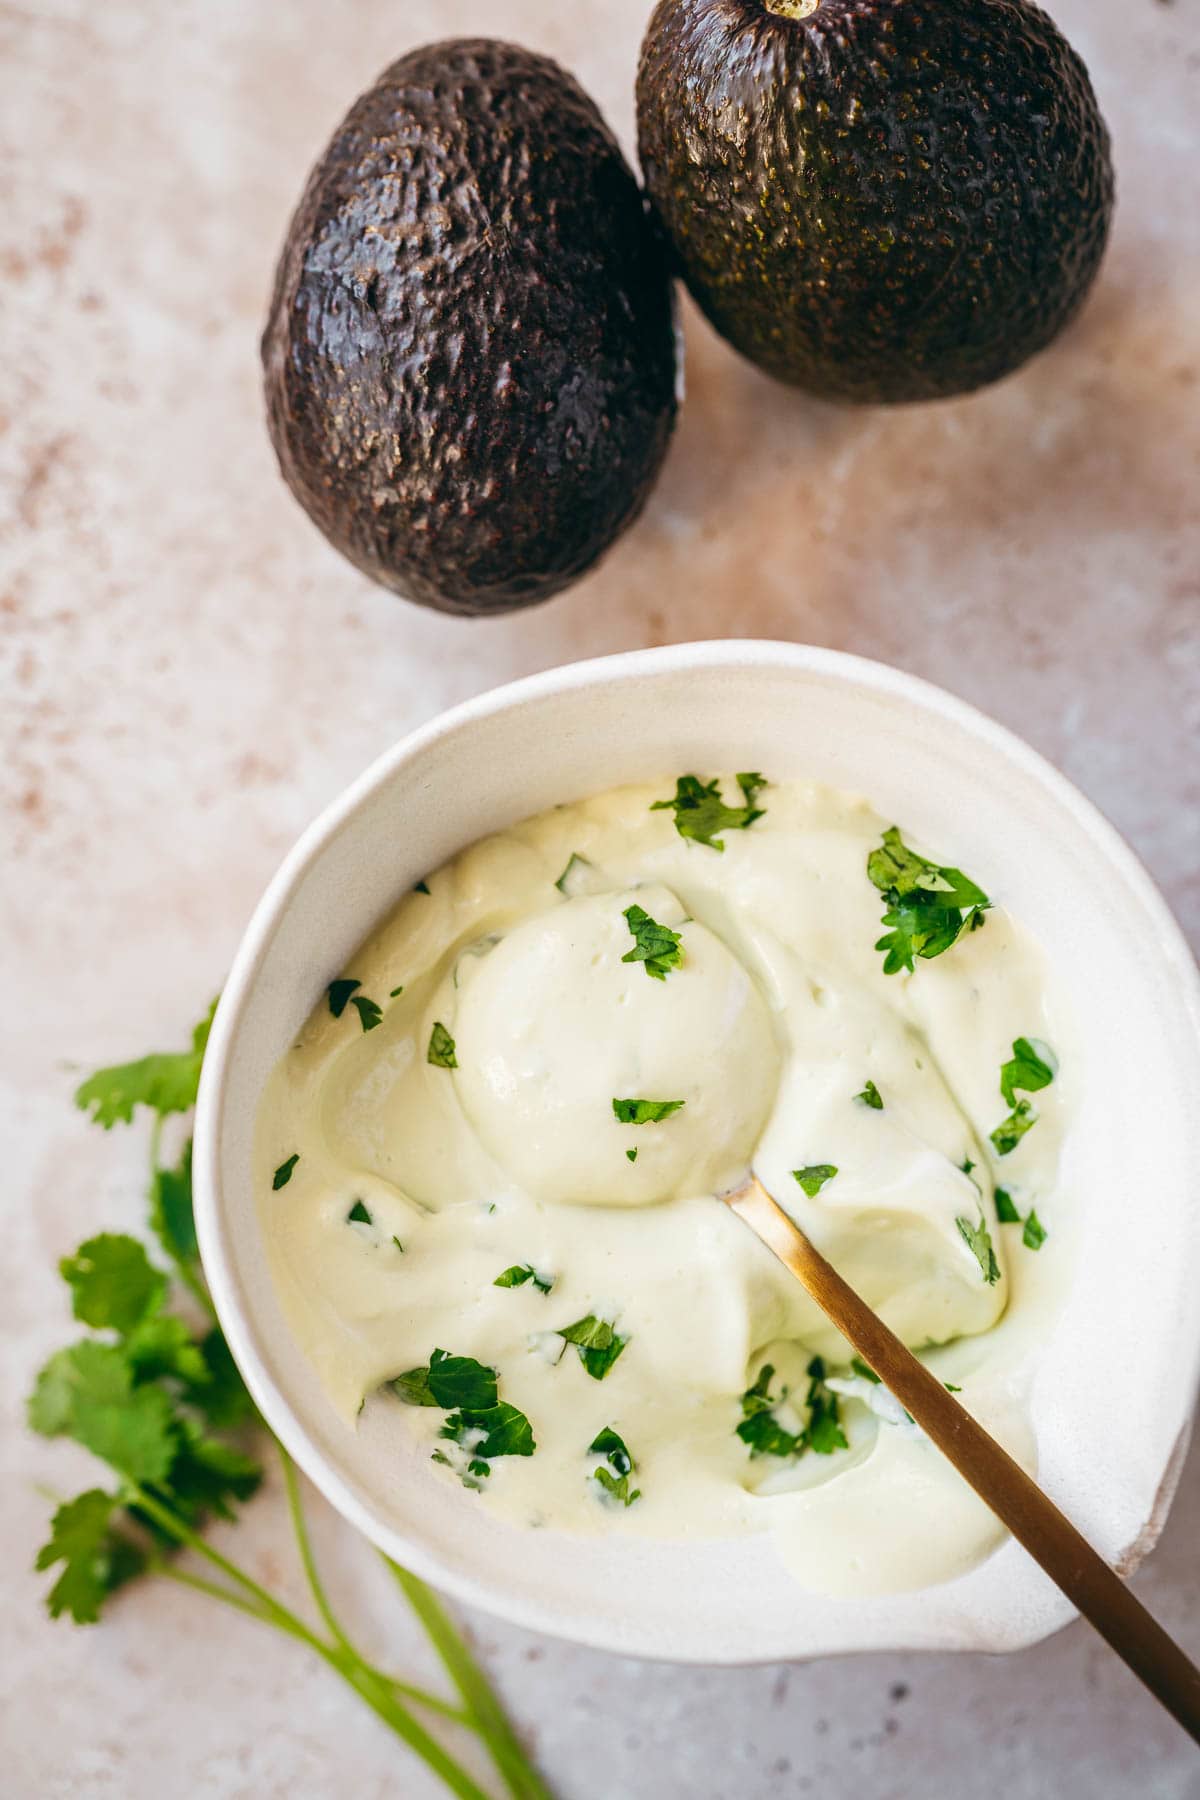 Freshly made avocado crema garnished with cilantro in a white ceramic bowl with a golden spoon.